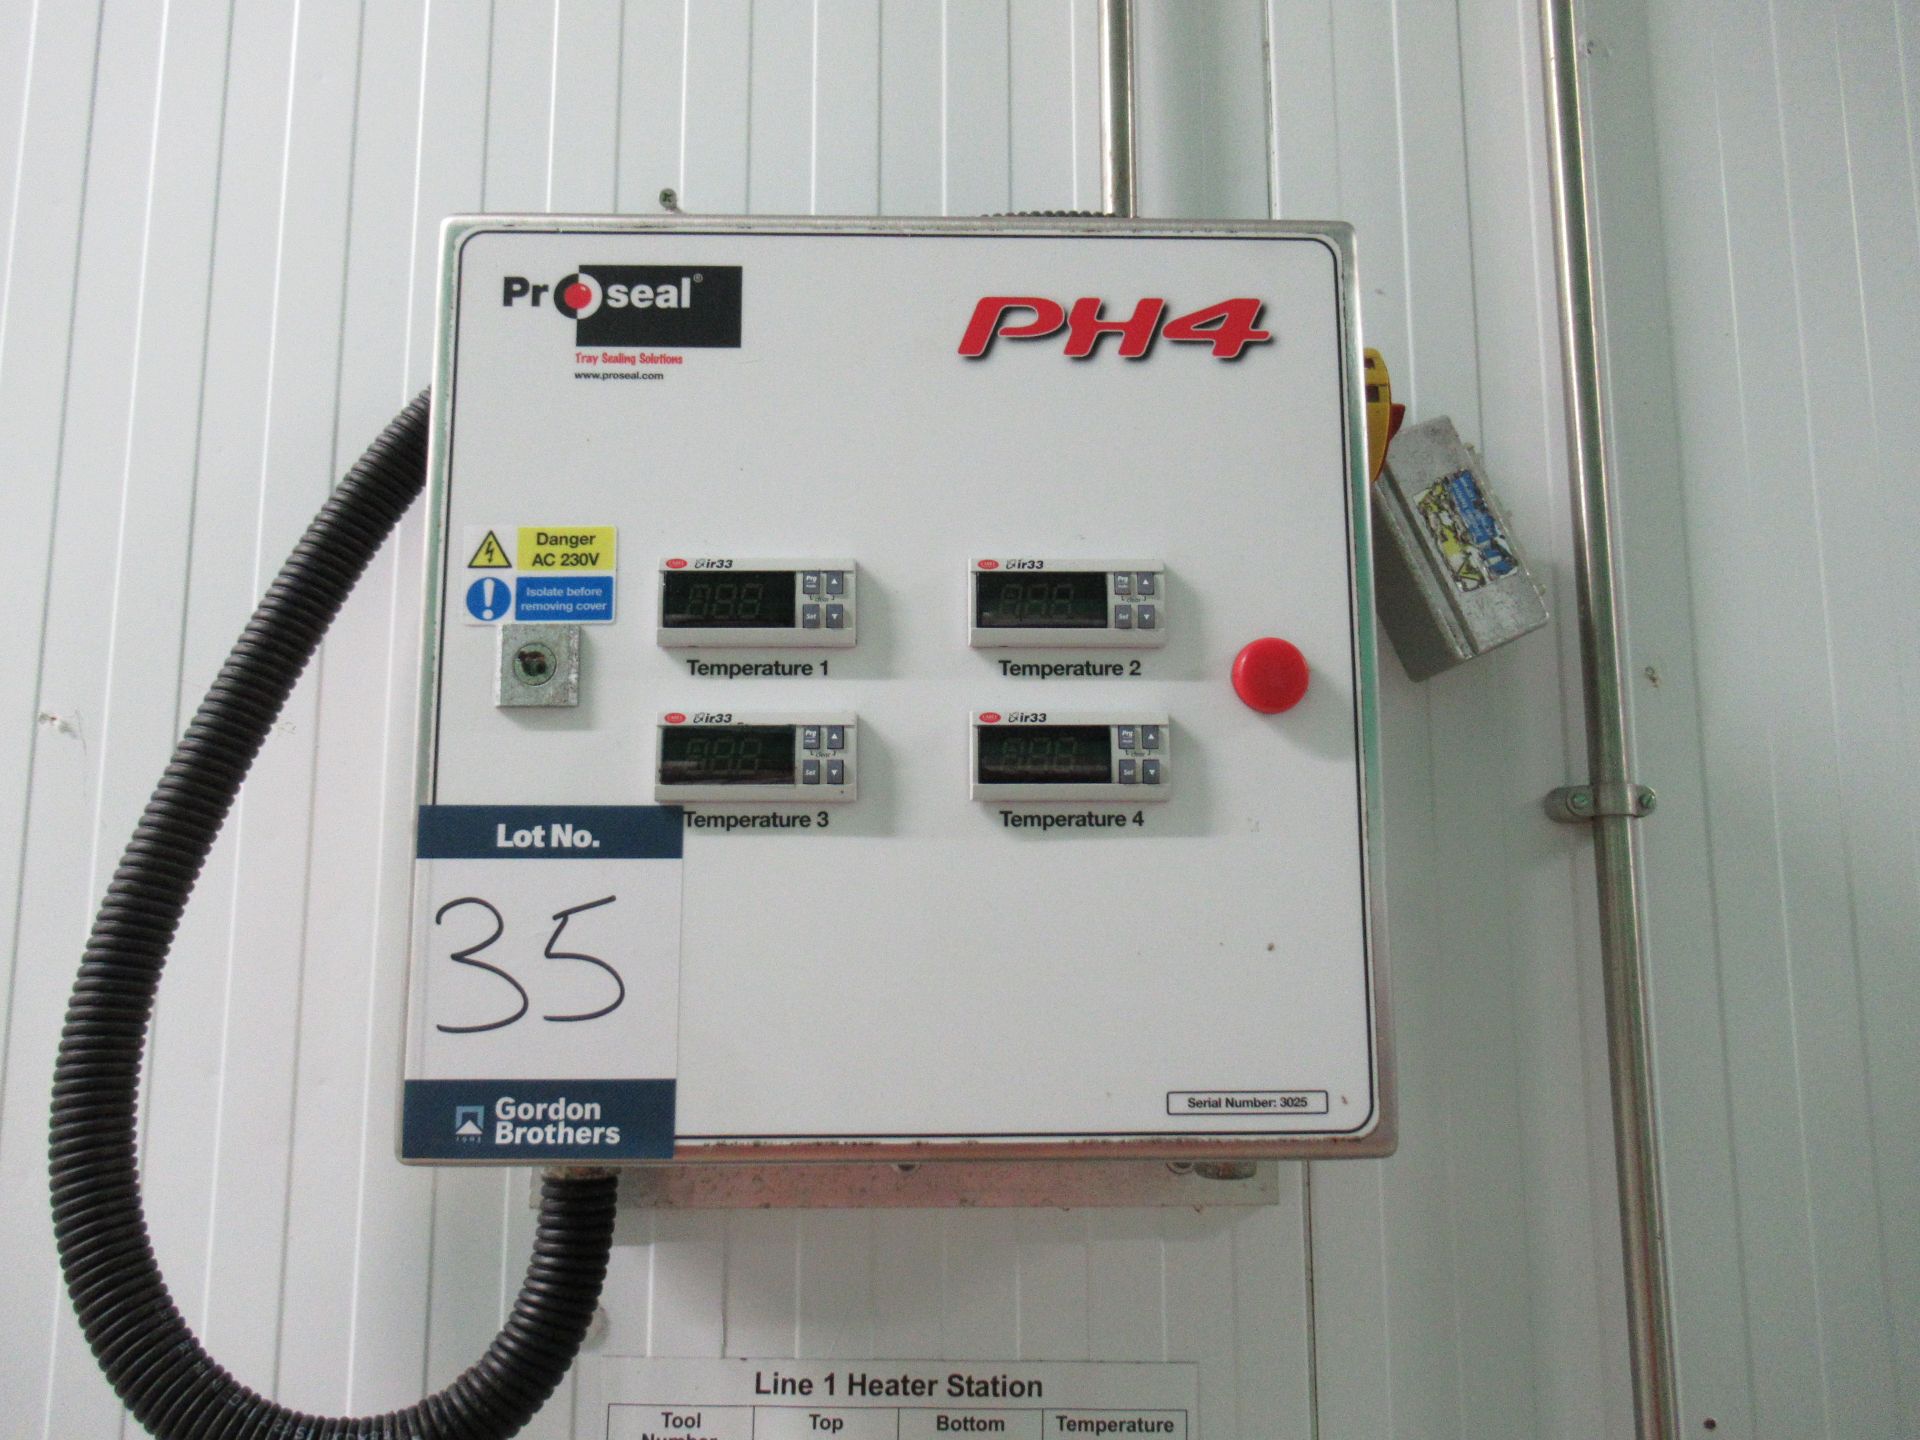 Proseal PH4 tool pre-heater panel. Serial no: 3025 wall mounted